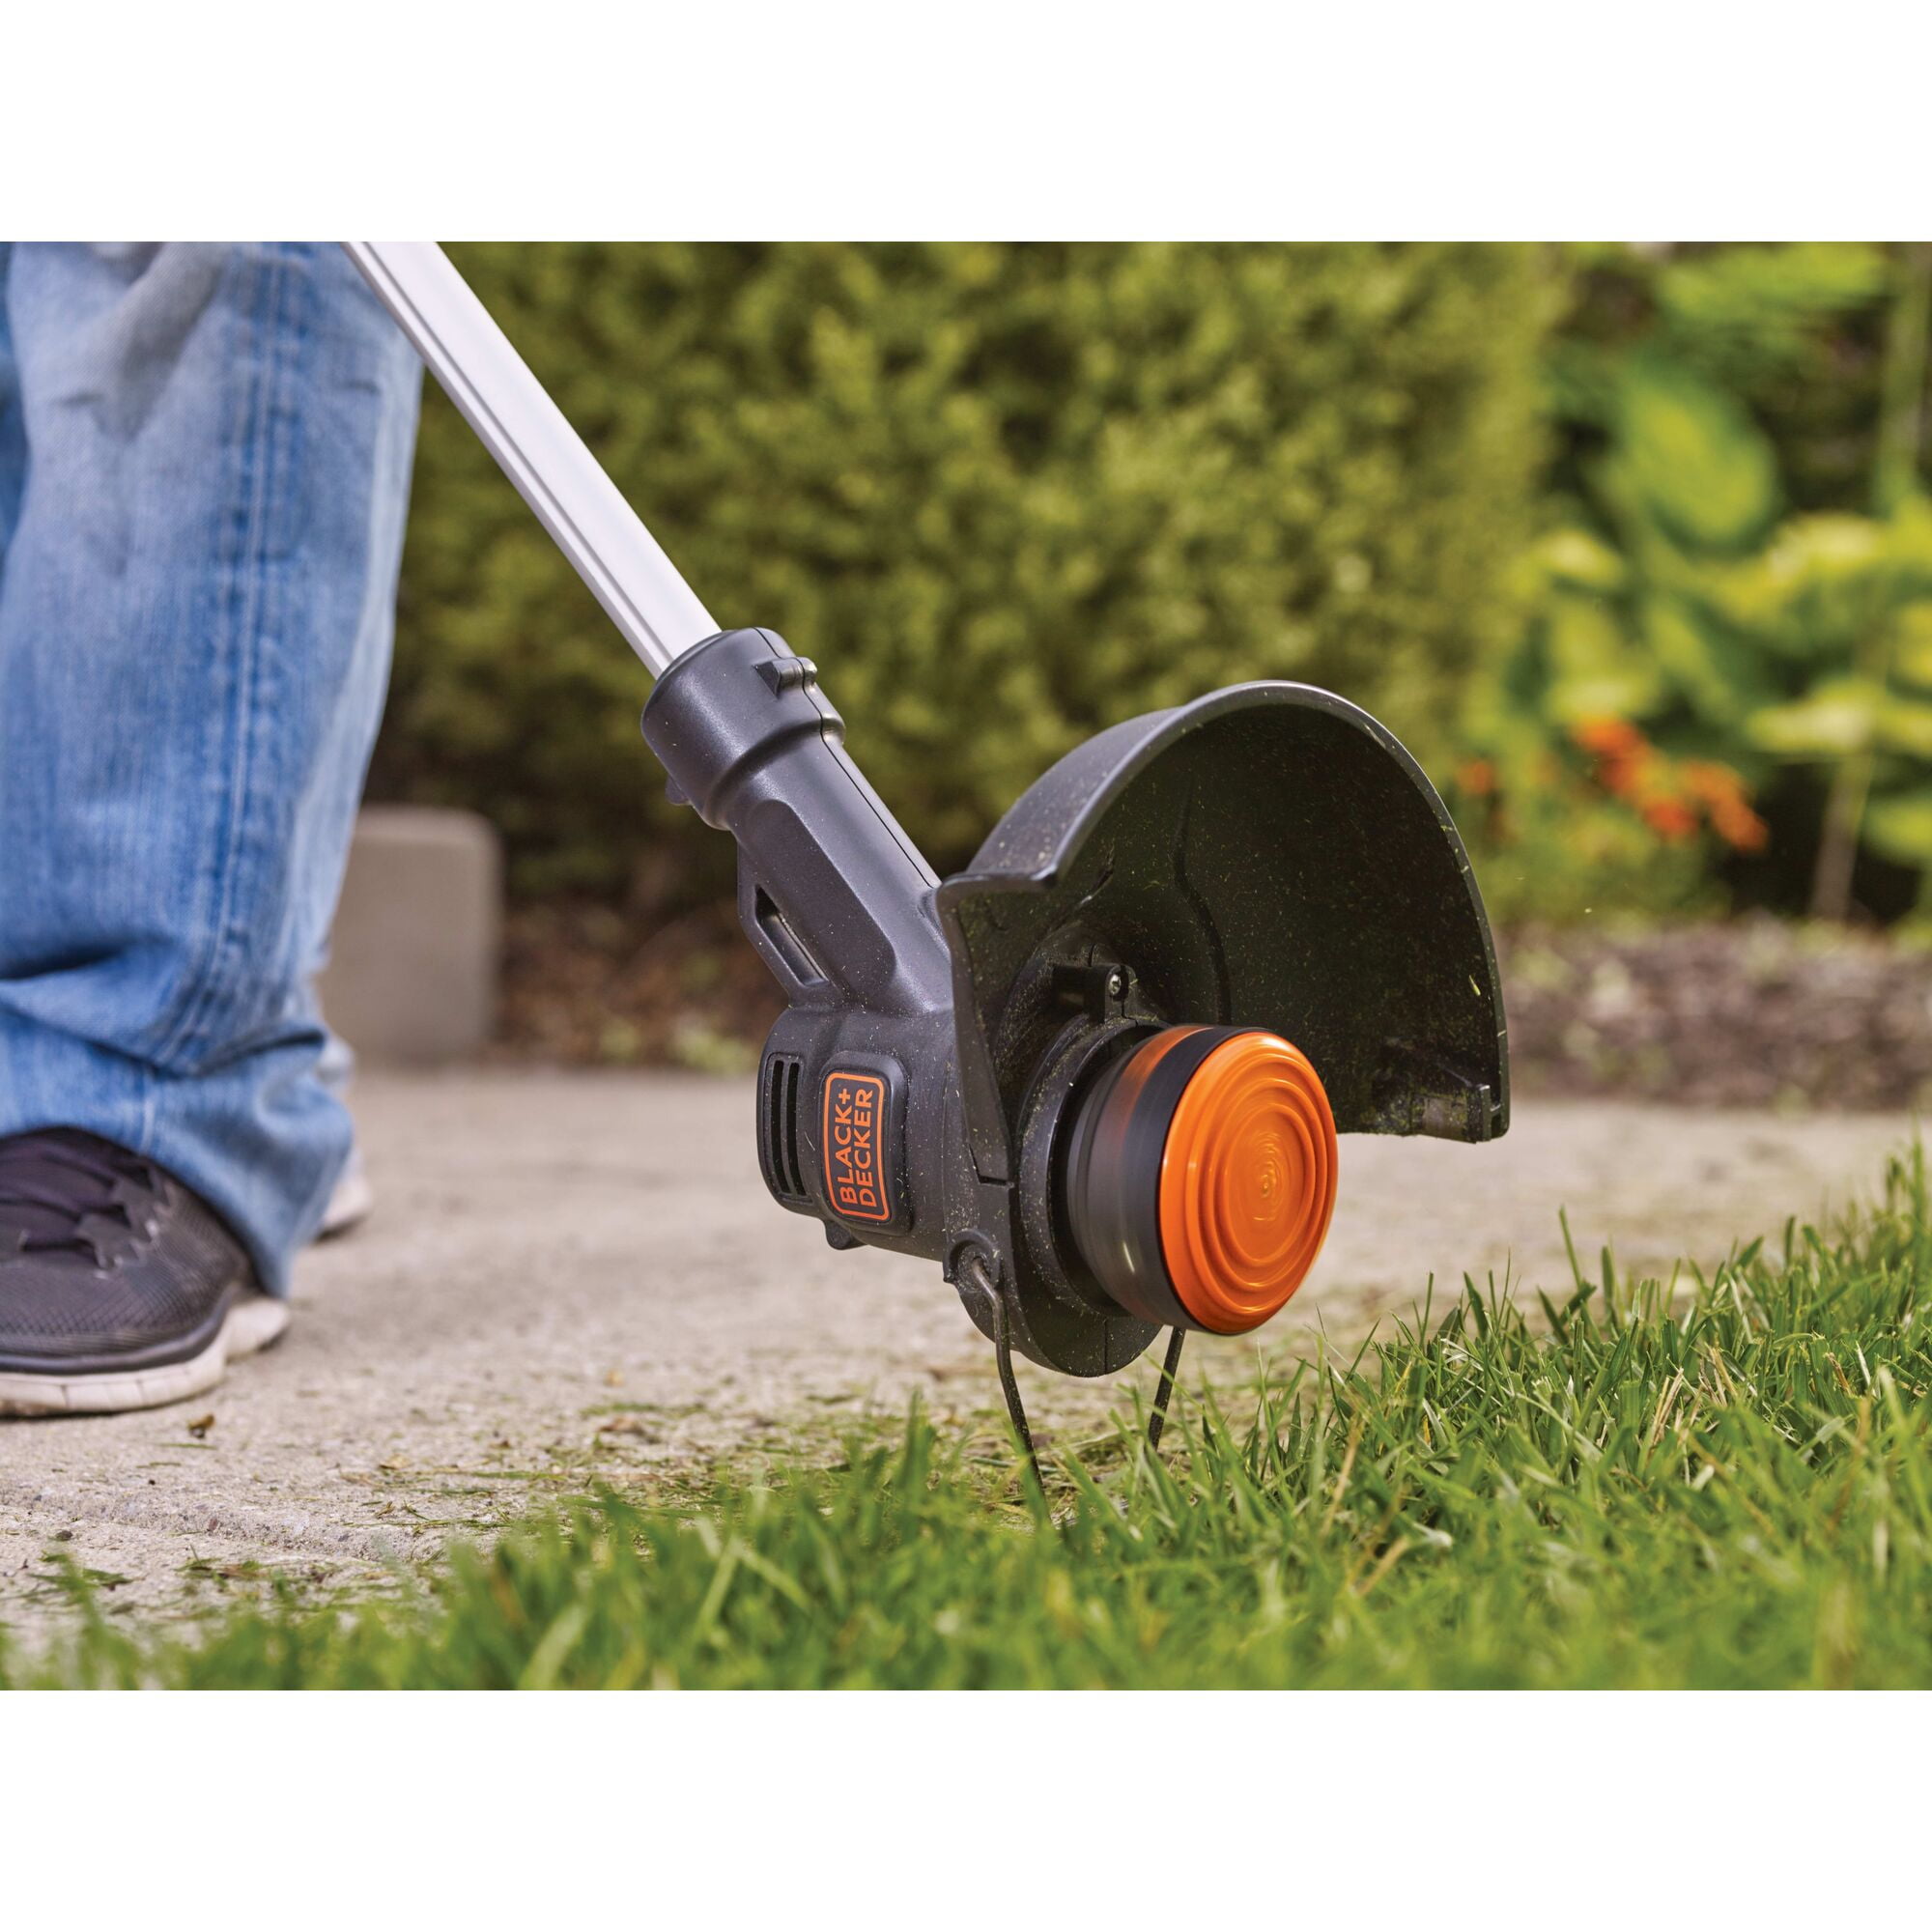 Black and Decker LST420 - Cordless 20V Lith String Trimmer Type 1